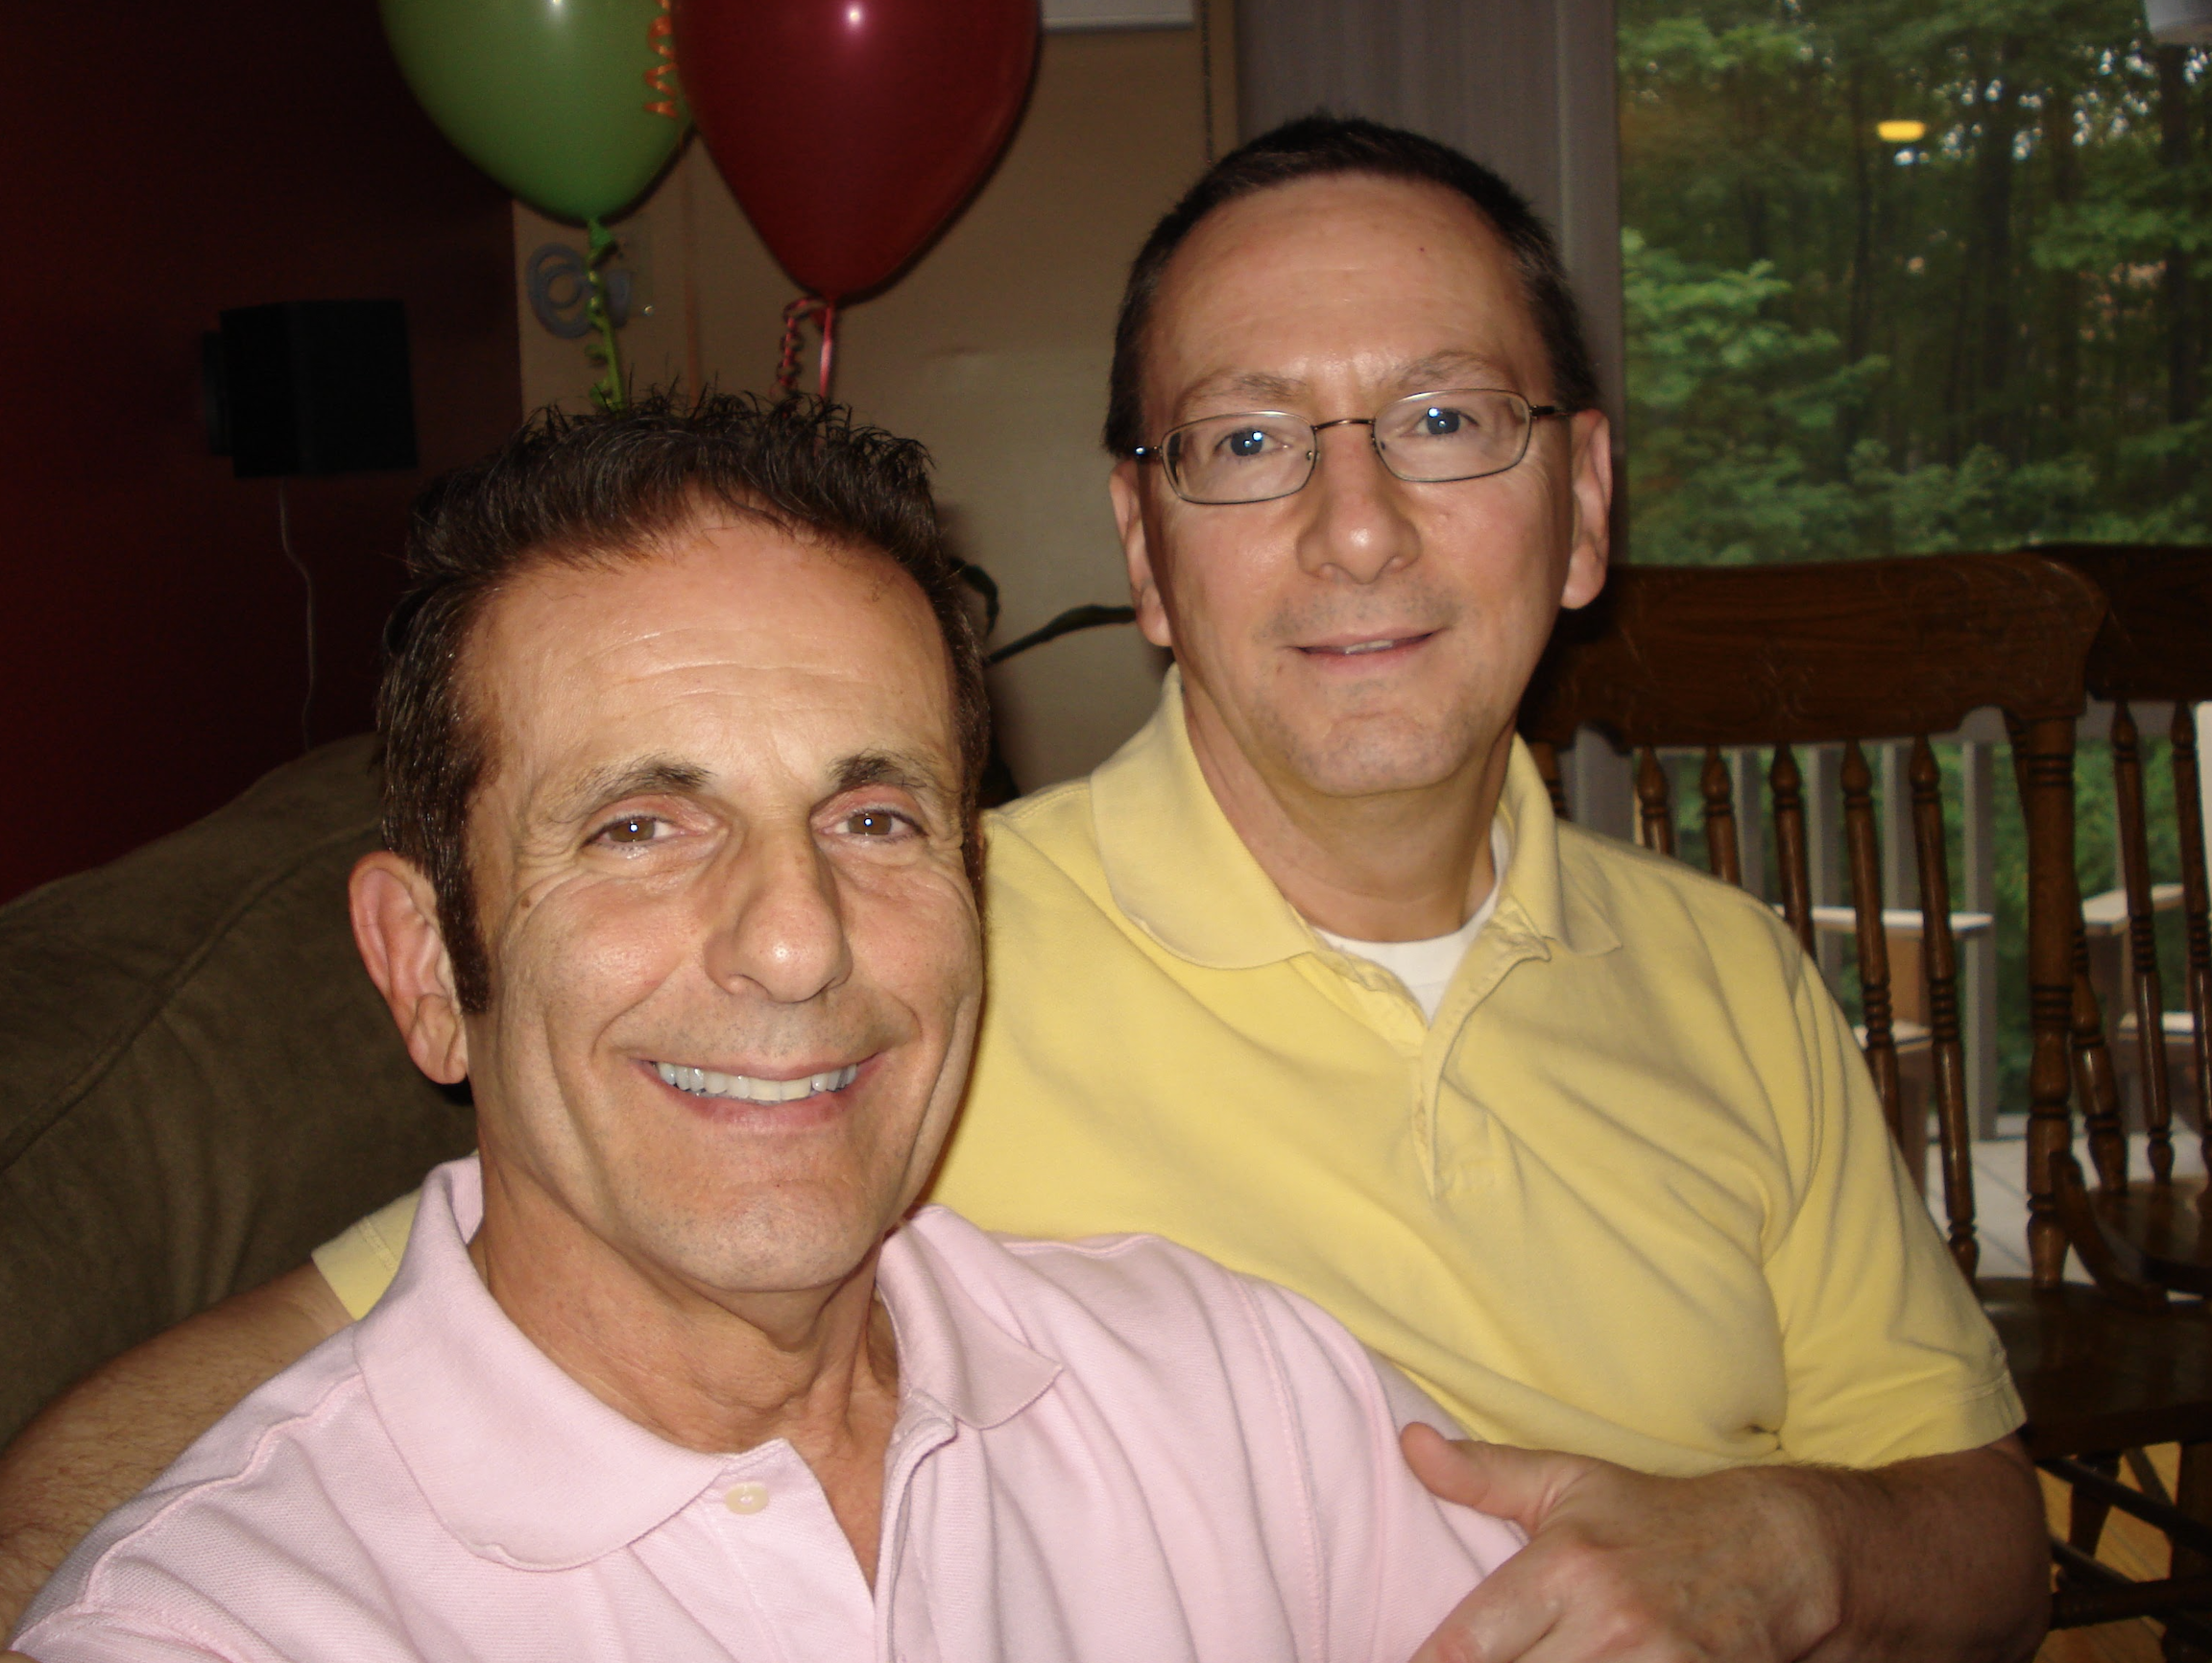 Two men embracing with balloons behind them